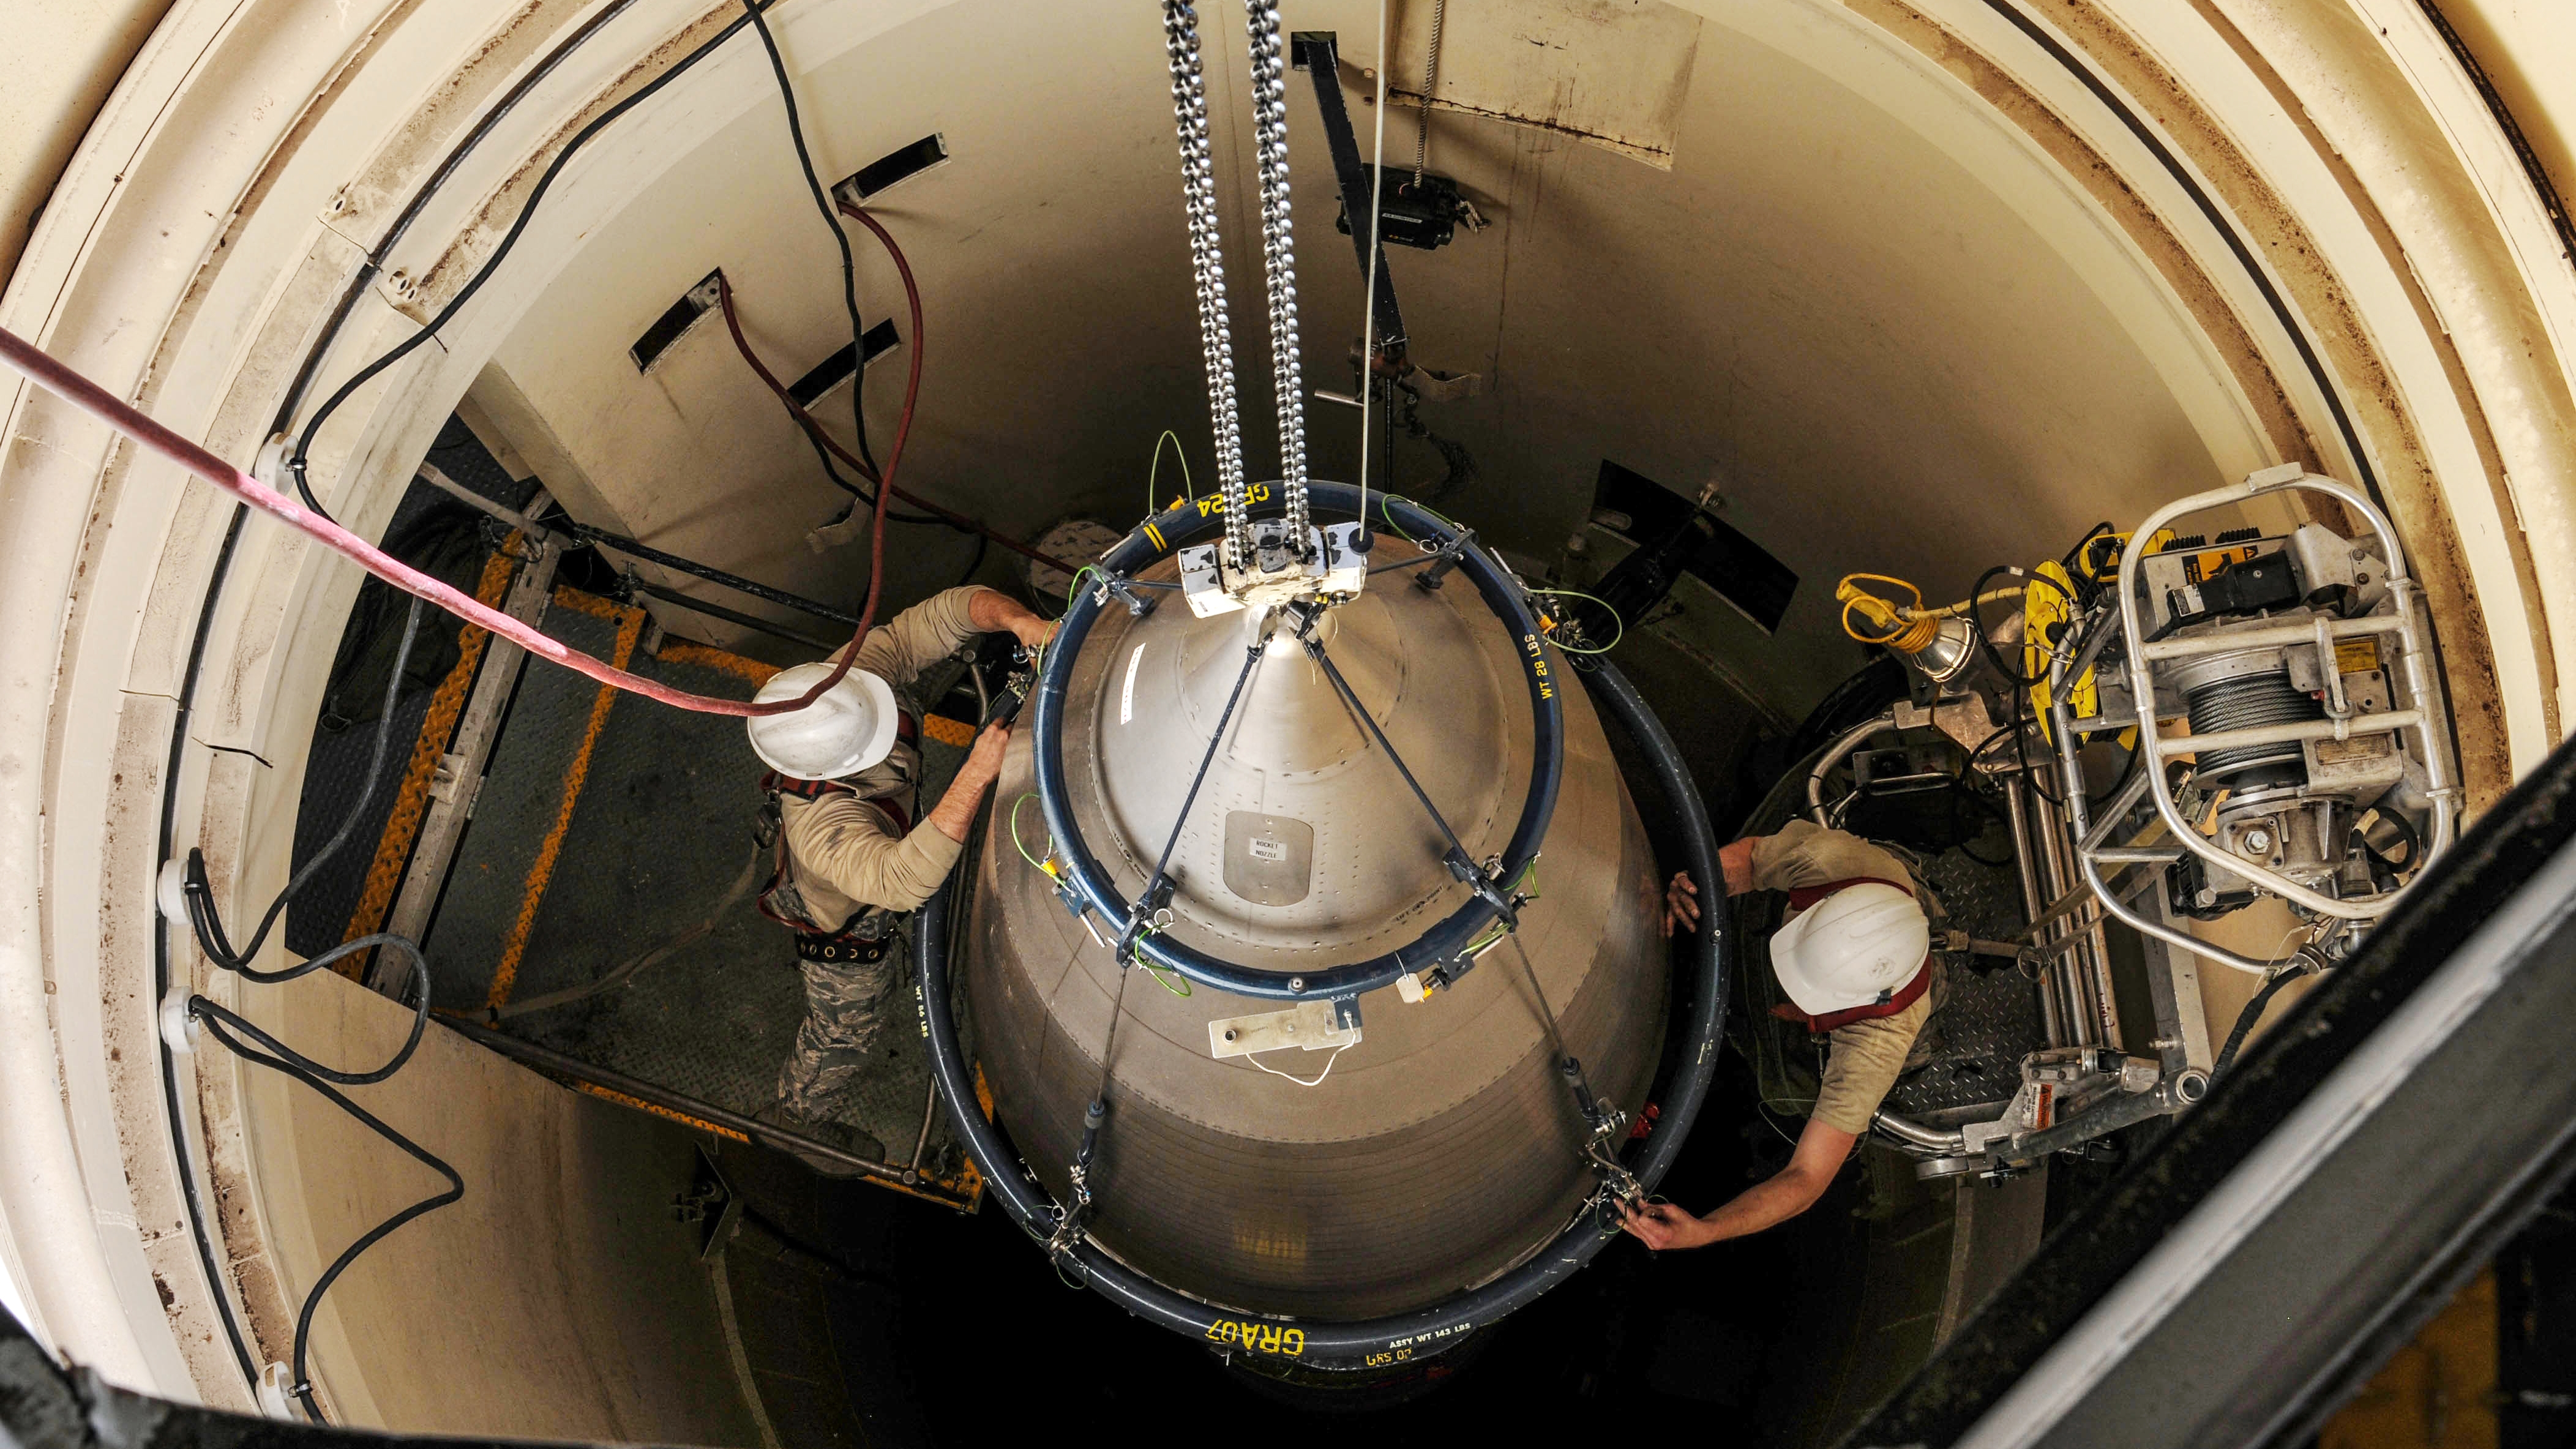 Replacement nuclear warhead triggers questioned